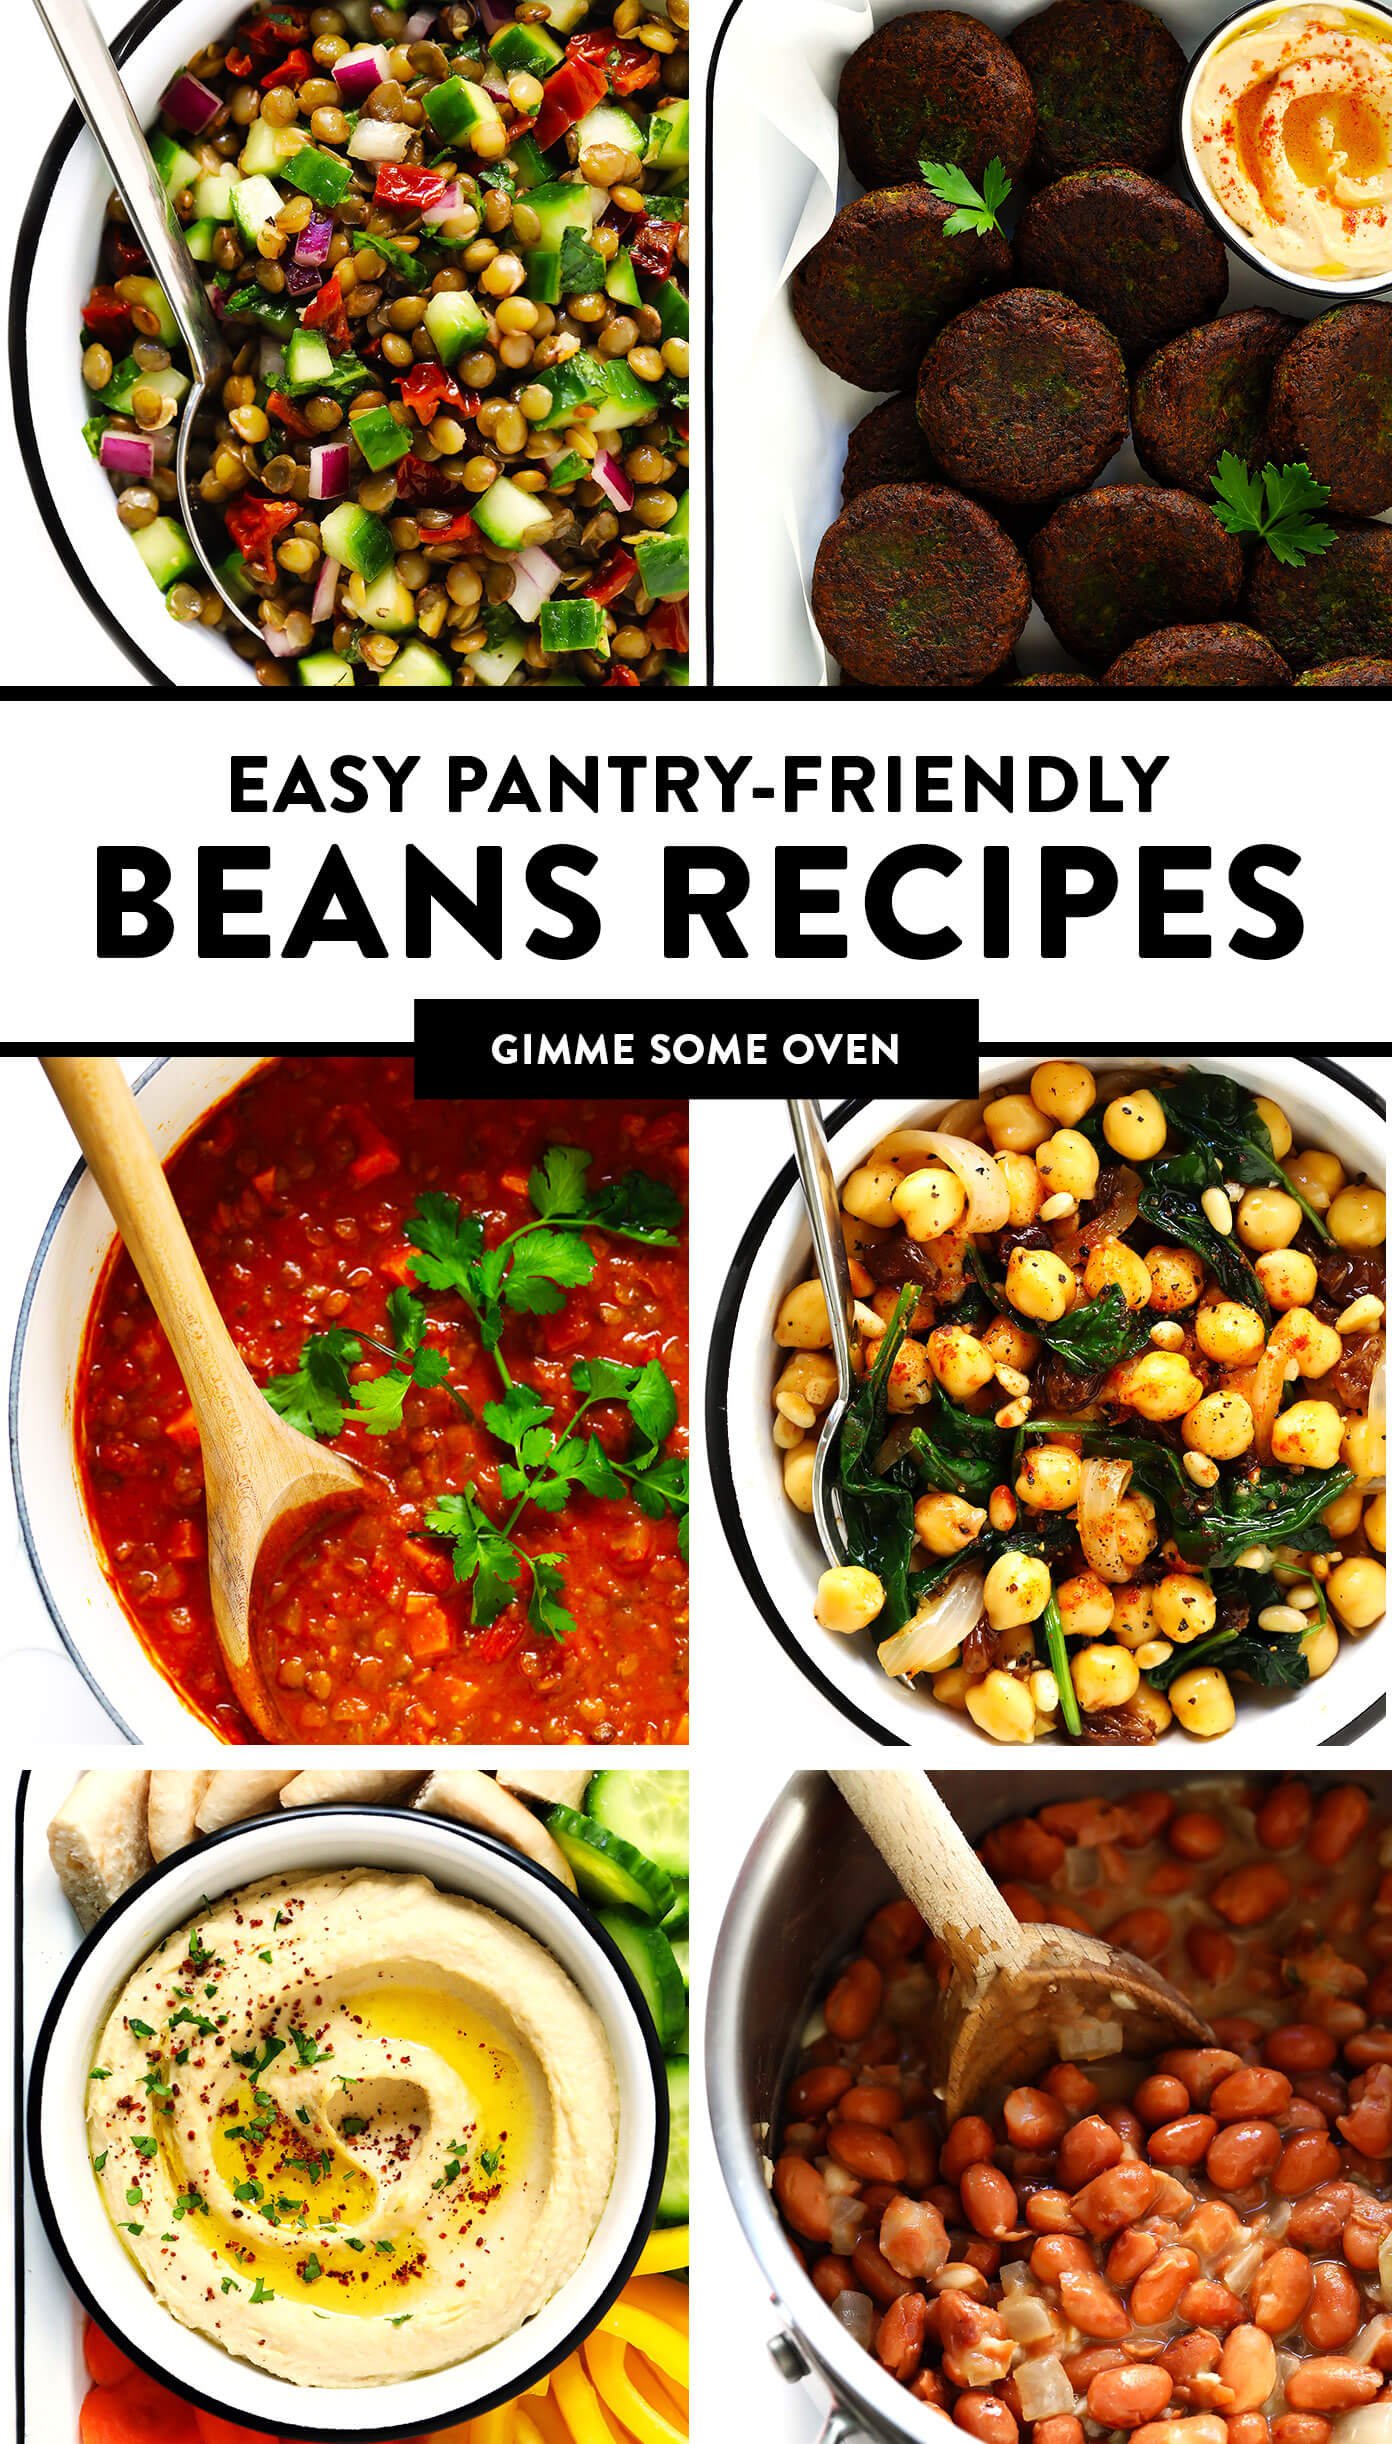 Easy Pantry-Friendly Recipes with Beans